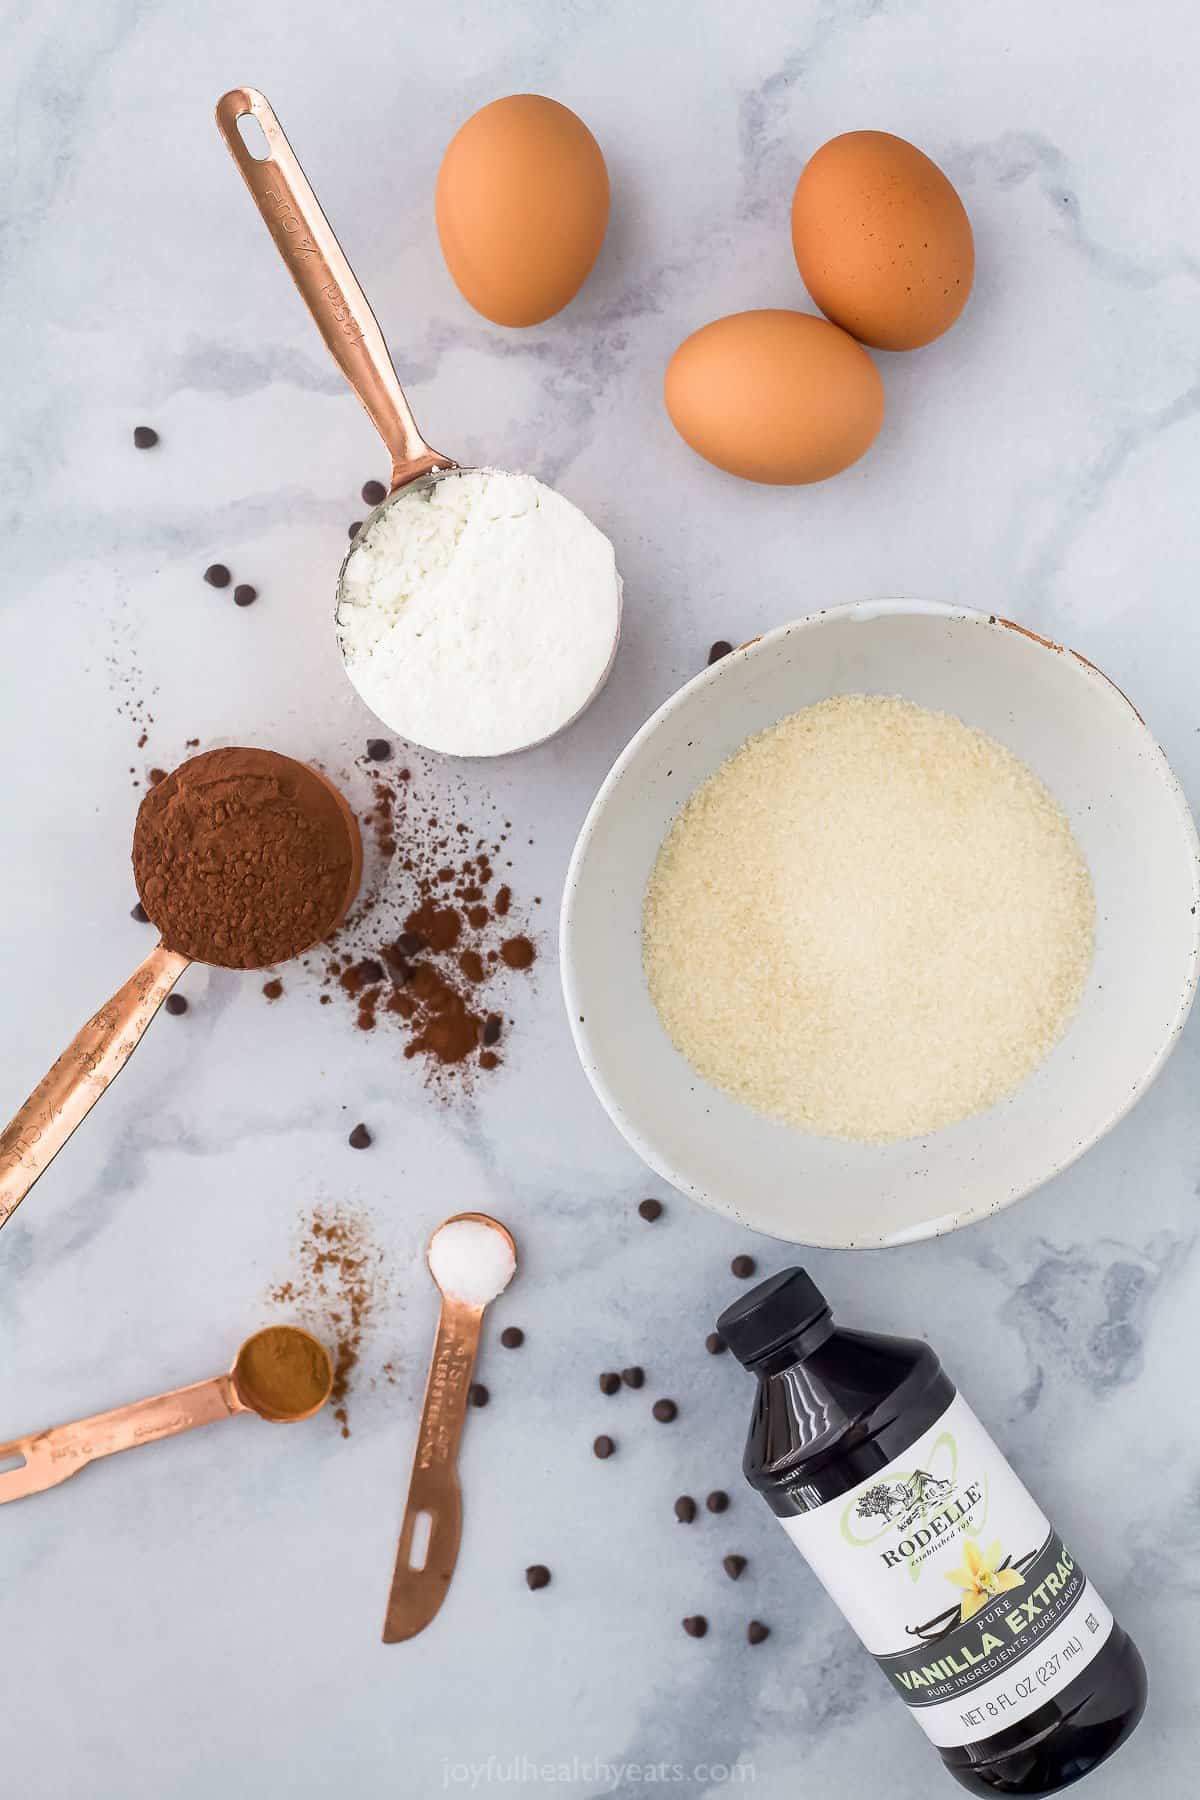 Eggs, vanilla extract, cinnamon, flour and the remaining ingredients arranged on a marble countertop